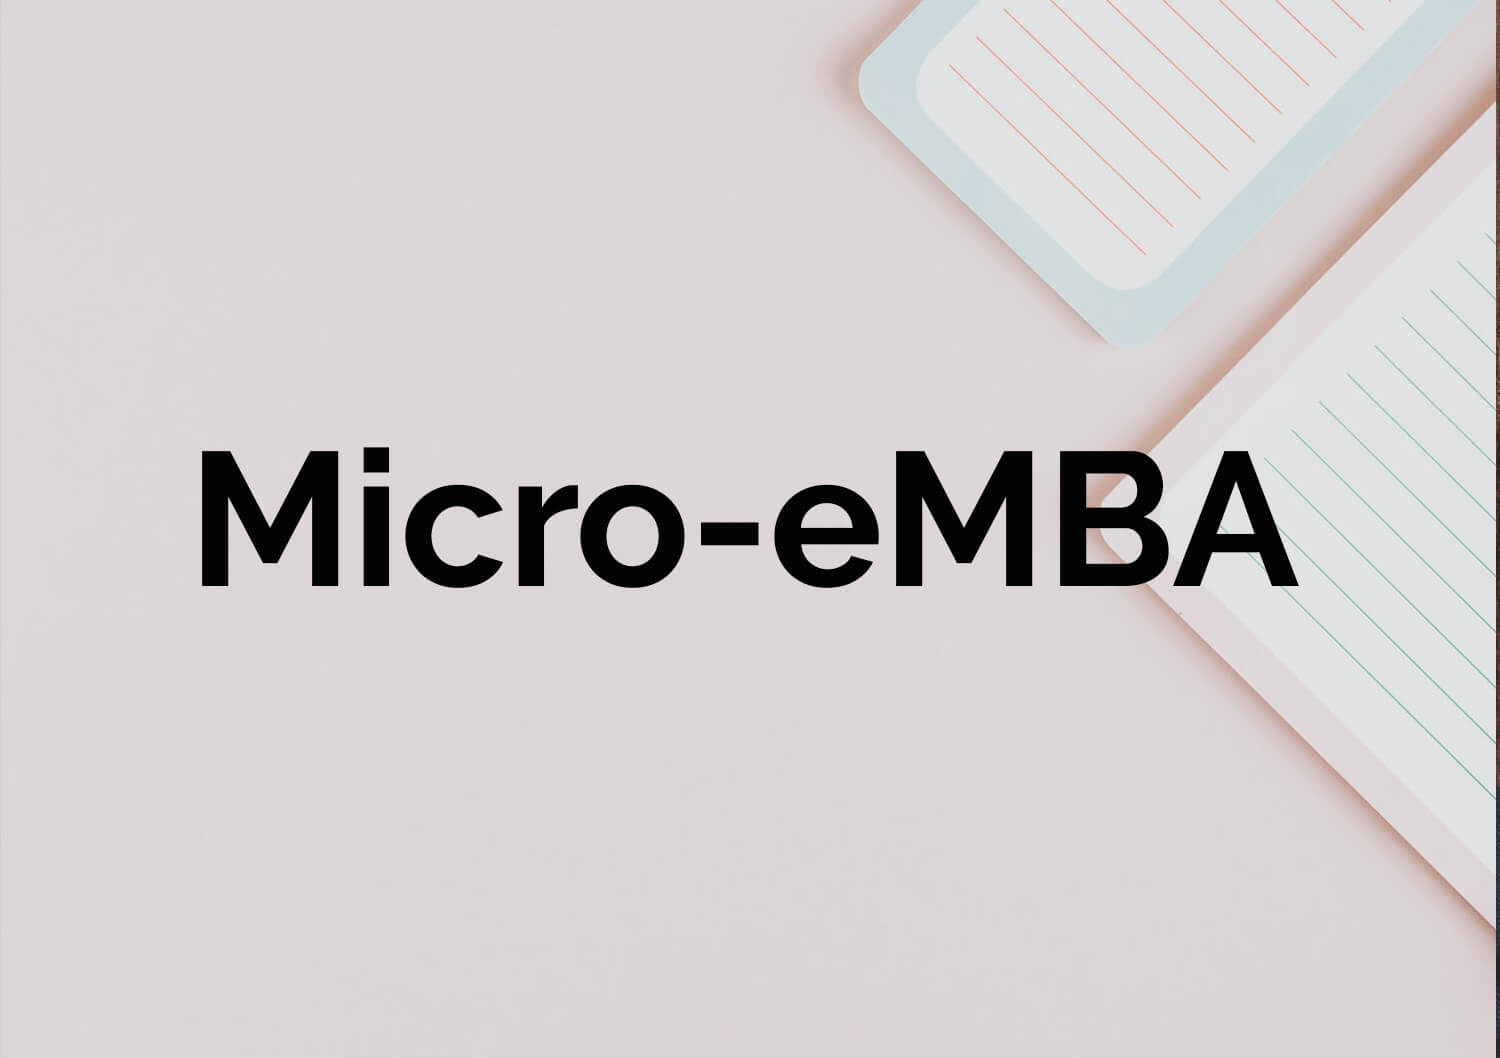 Micro-eMBA text on a blank note